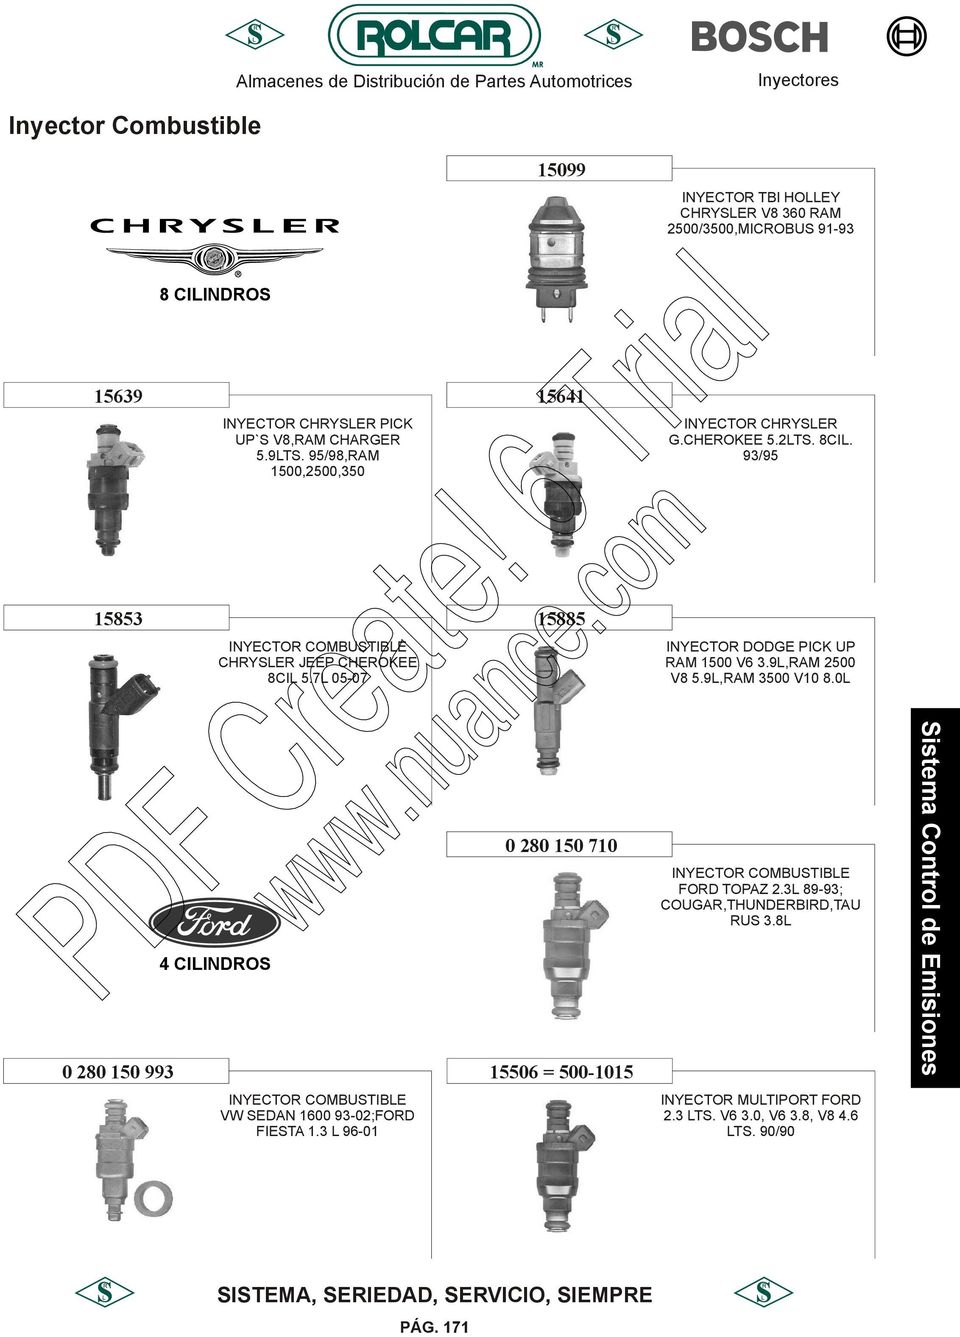 7L 05-07 INYECTOR DODGE PICK UP RAM 1500 V6 3.9L,RAM 2500 V8 5.9L,RAM 3500 V10 8.0L 0 280 150 993 0 280 150 710 15506 = 500-1015 INYECTOR COMBUSTIBLE FORD TOPAZ 2.